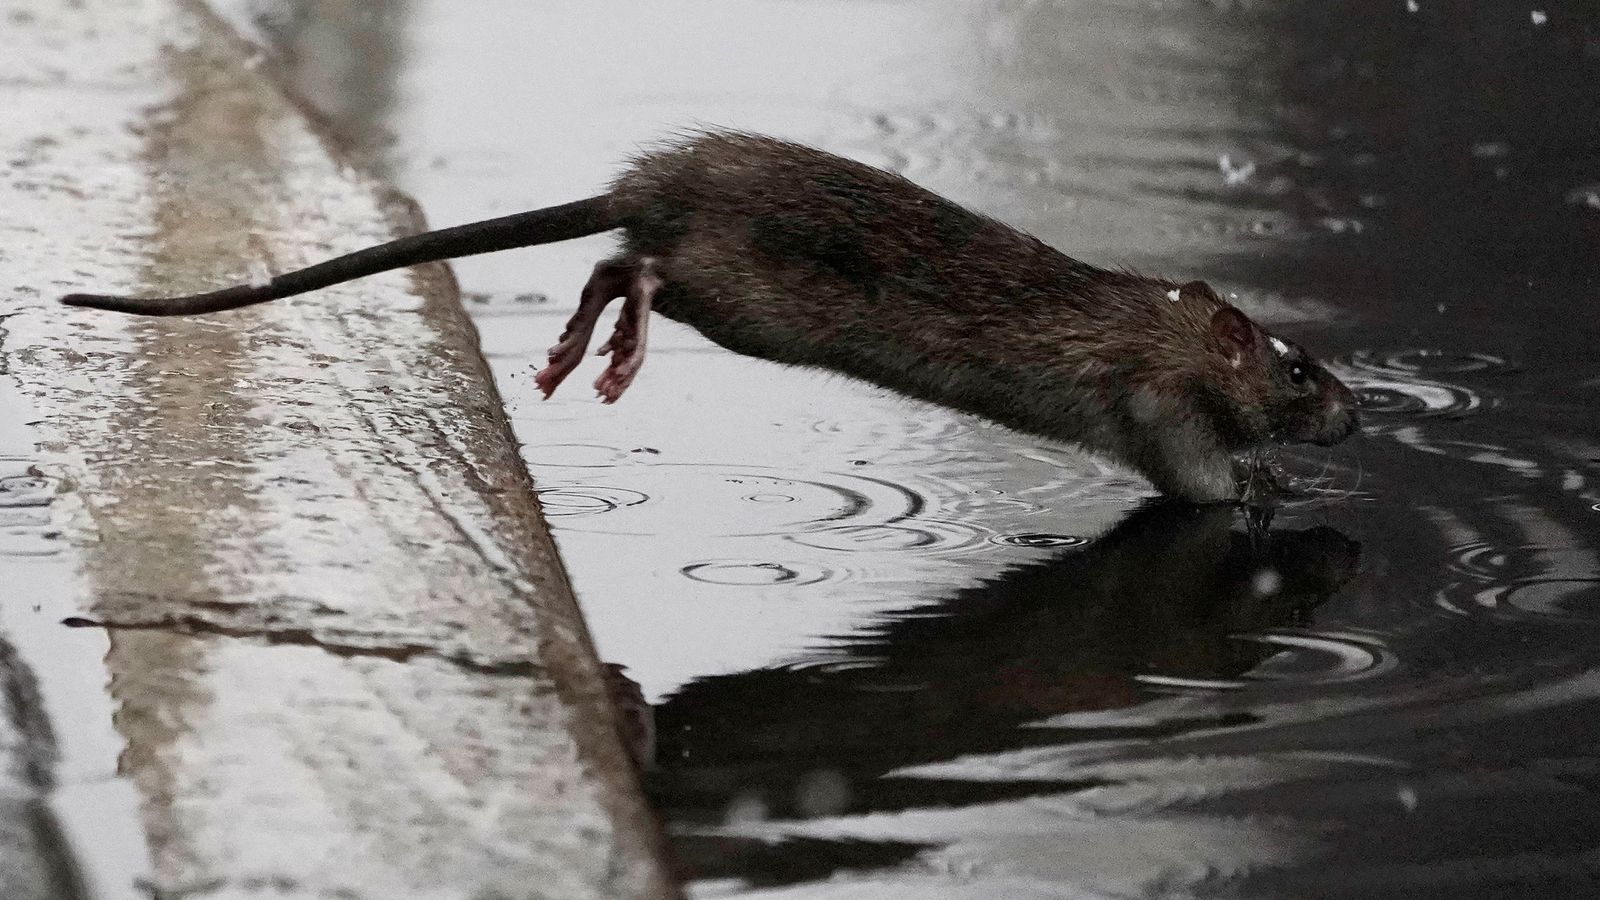 New York City appoints 'rat czar' to lead 'wholesale slaughter' of hated rodents